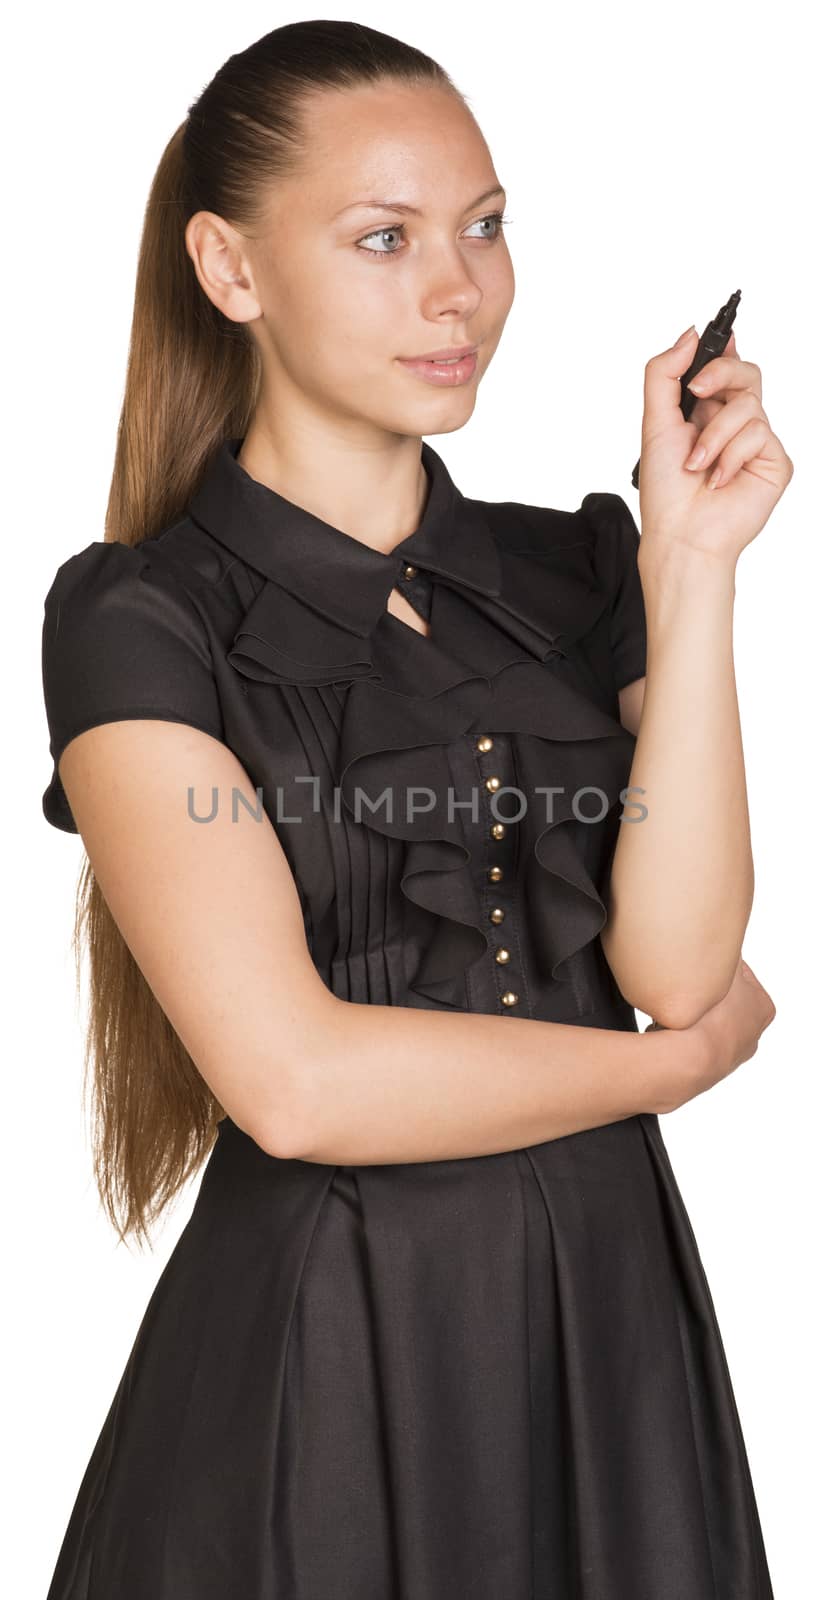 Young business woman drawing on imaginary surface. Isolated on white background